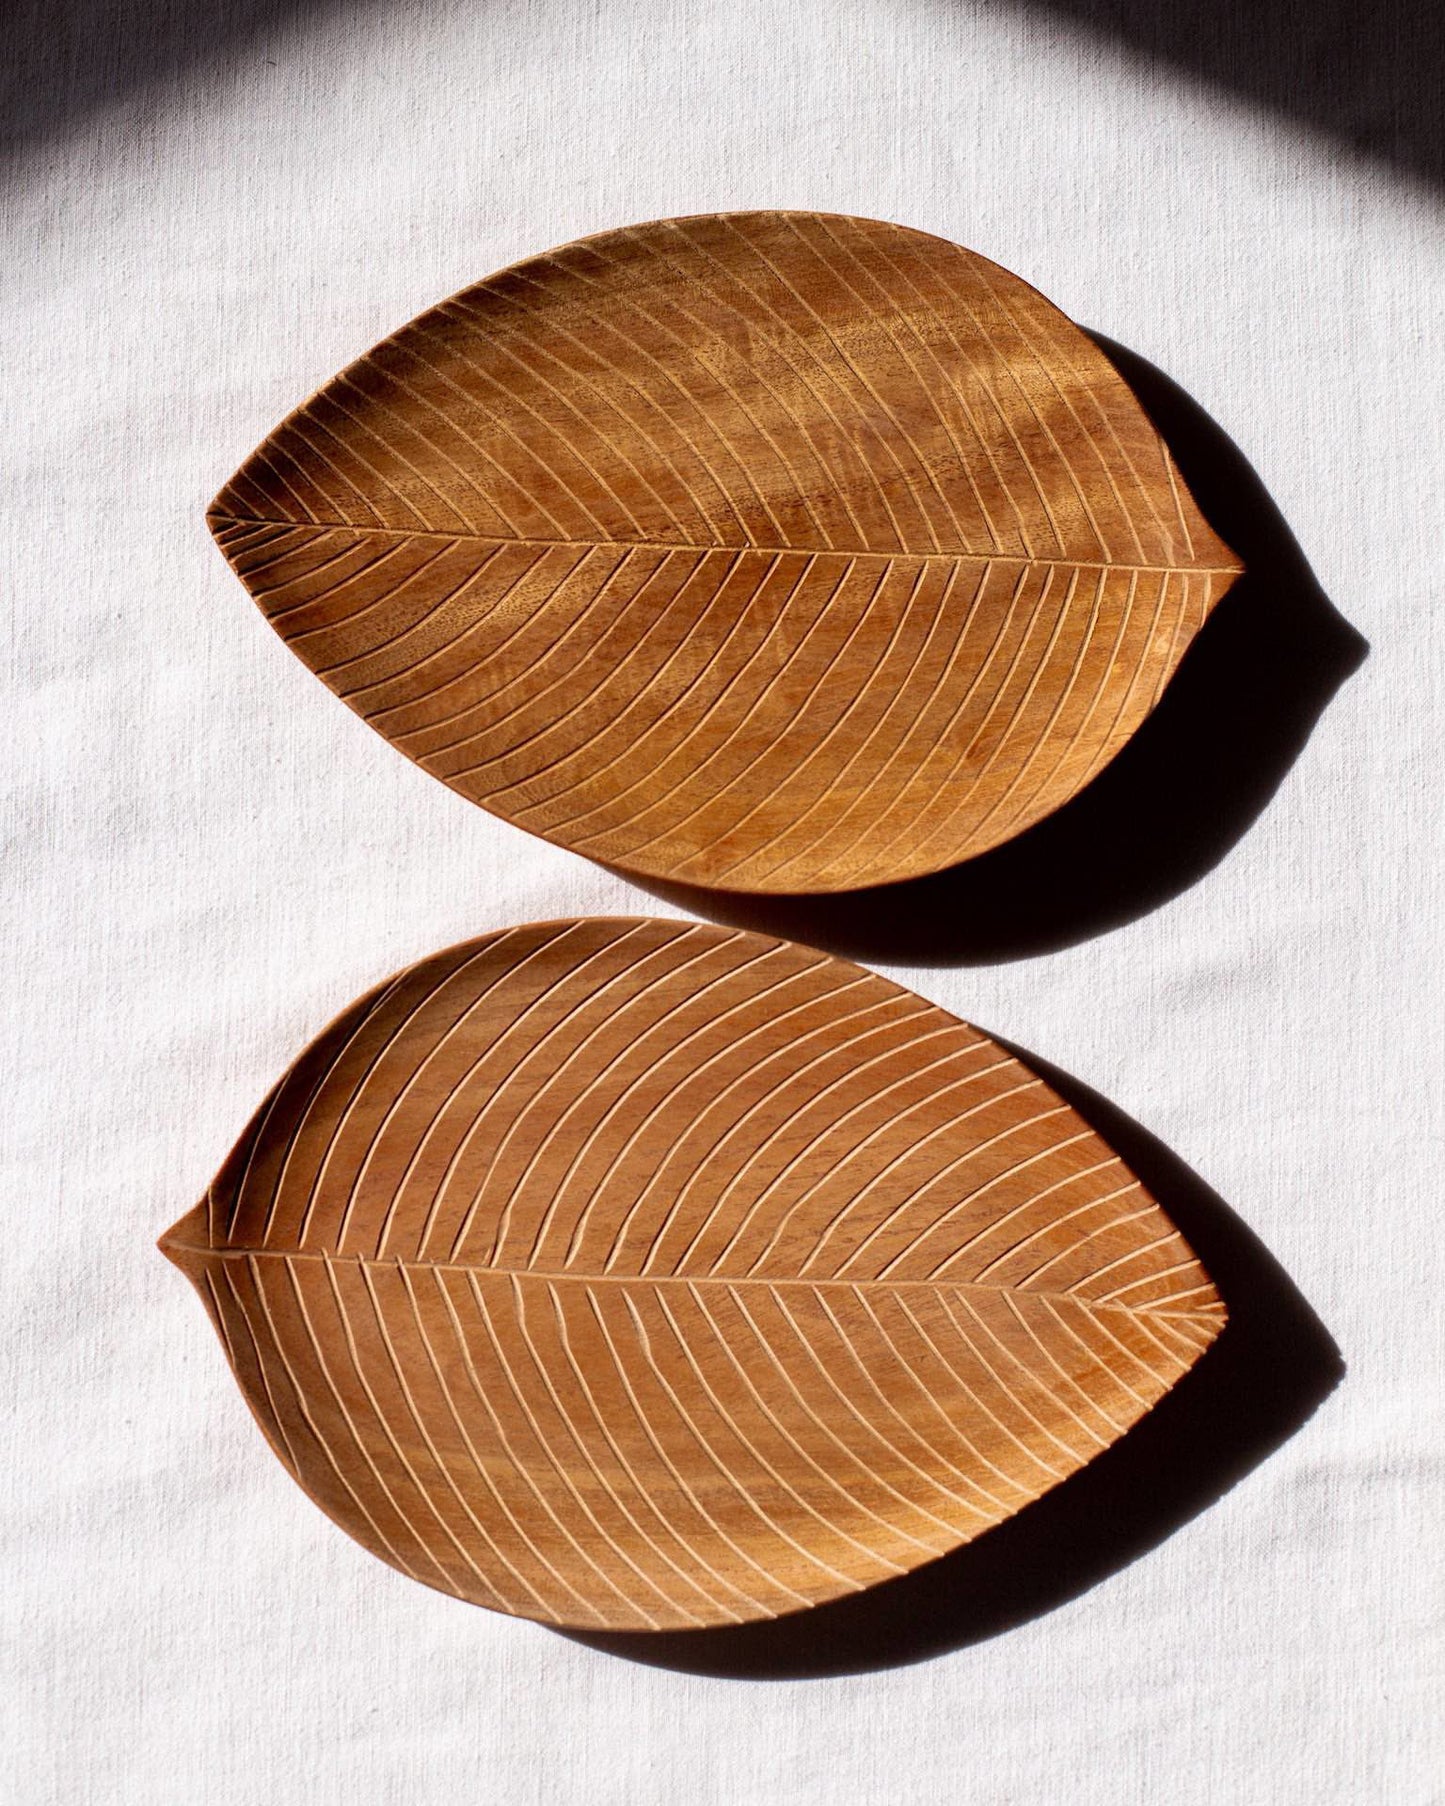 Wooden Leaf Tray - Trades of Hope 